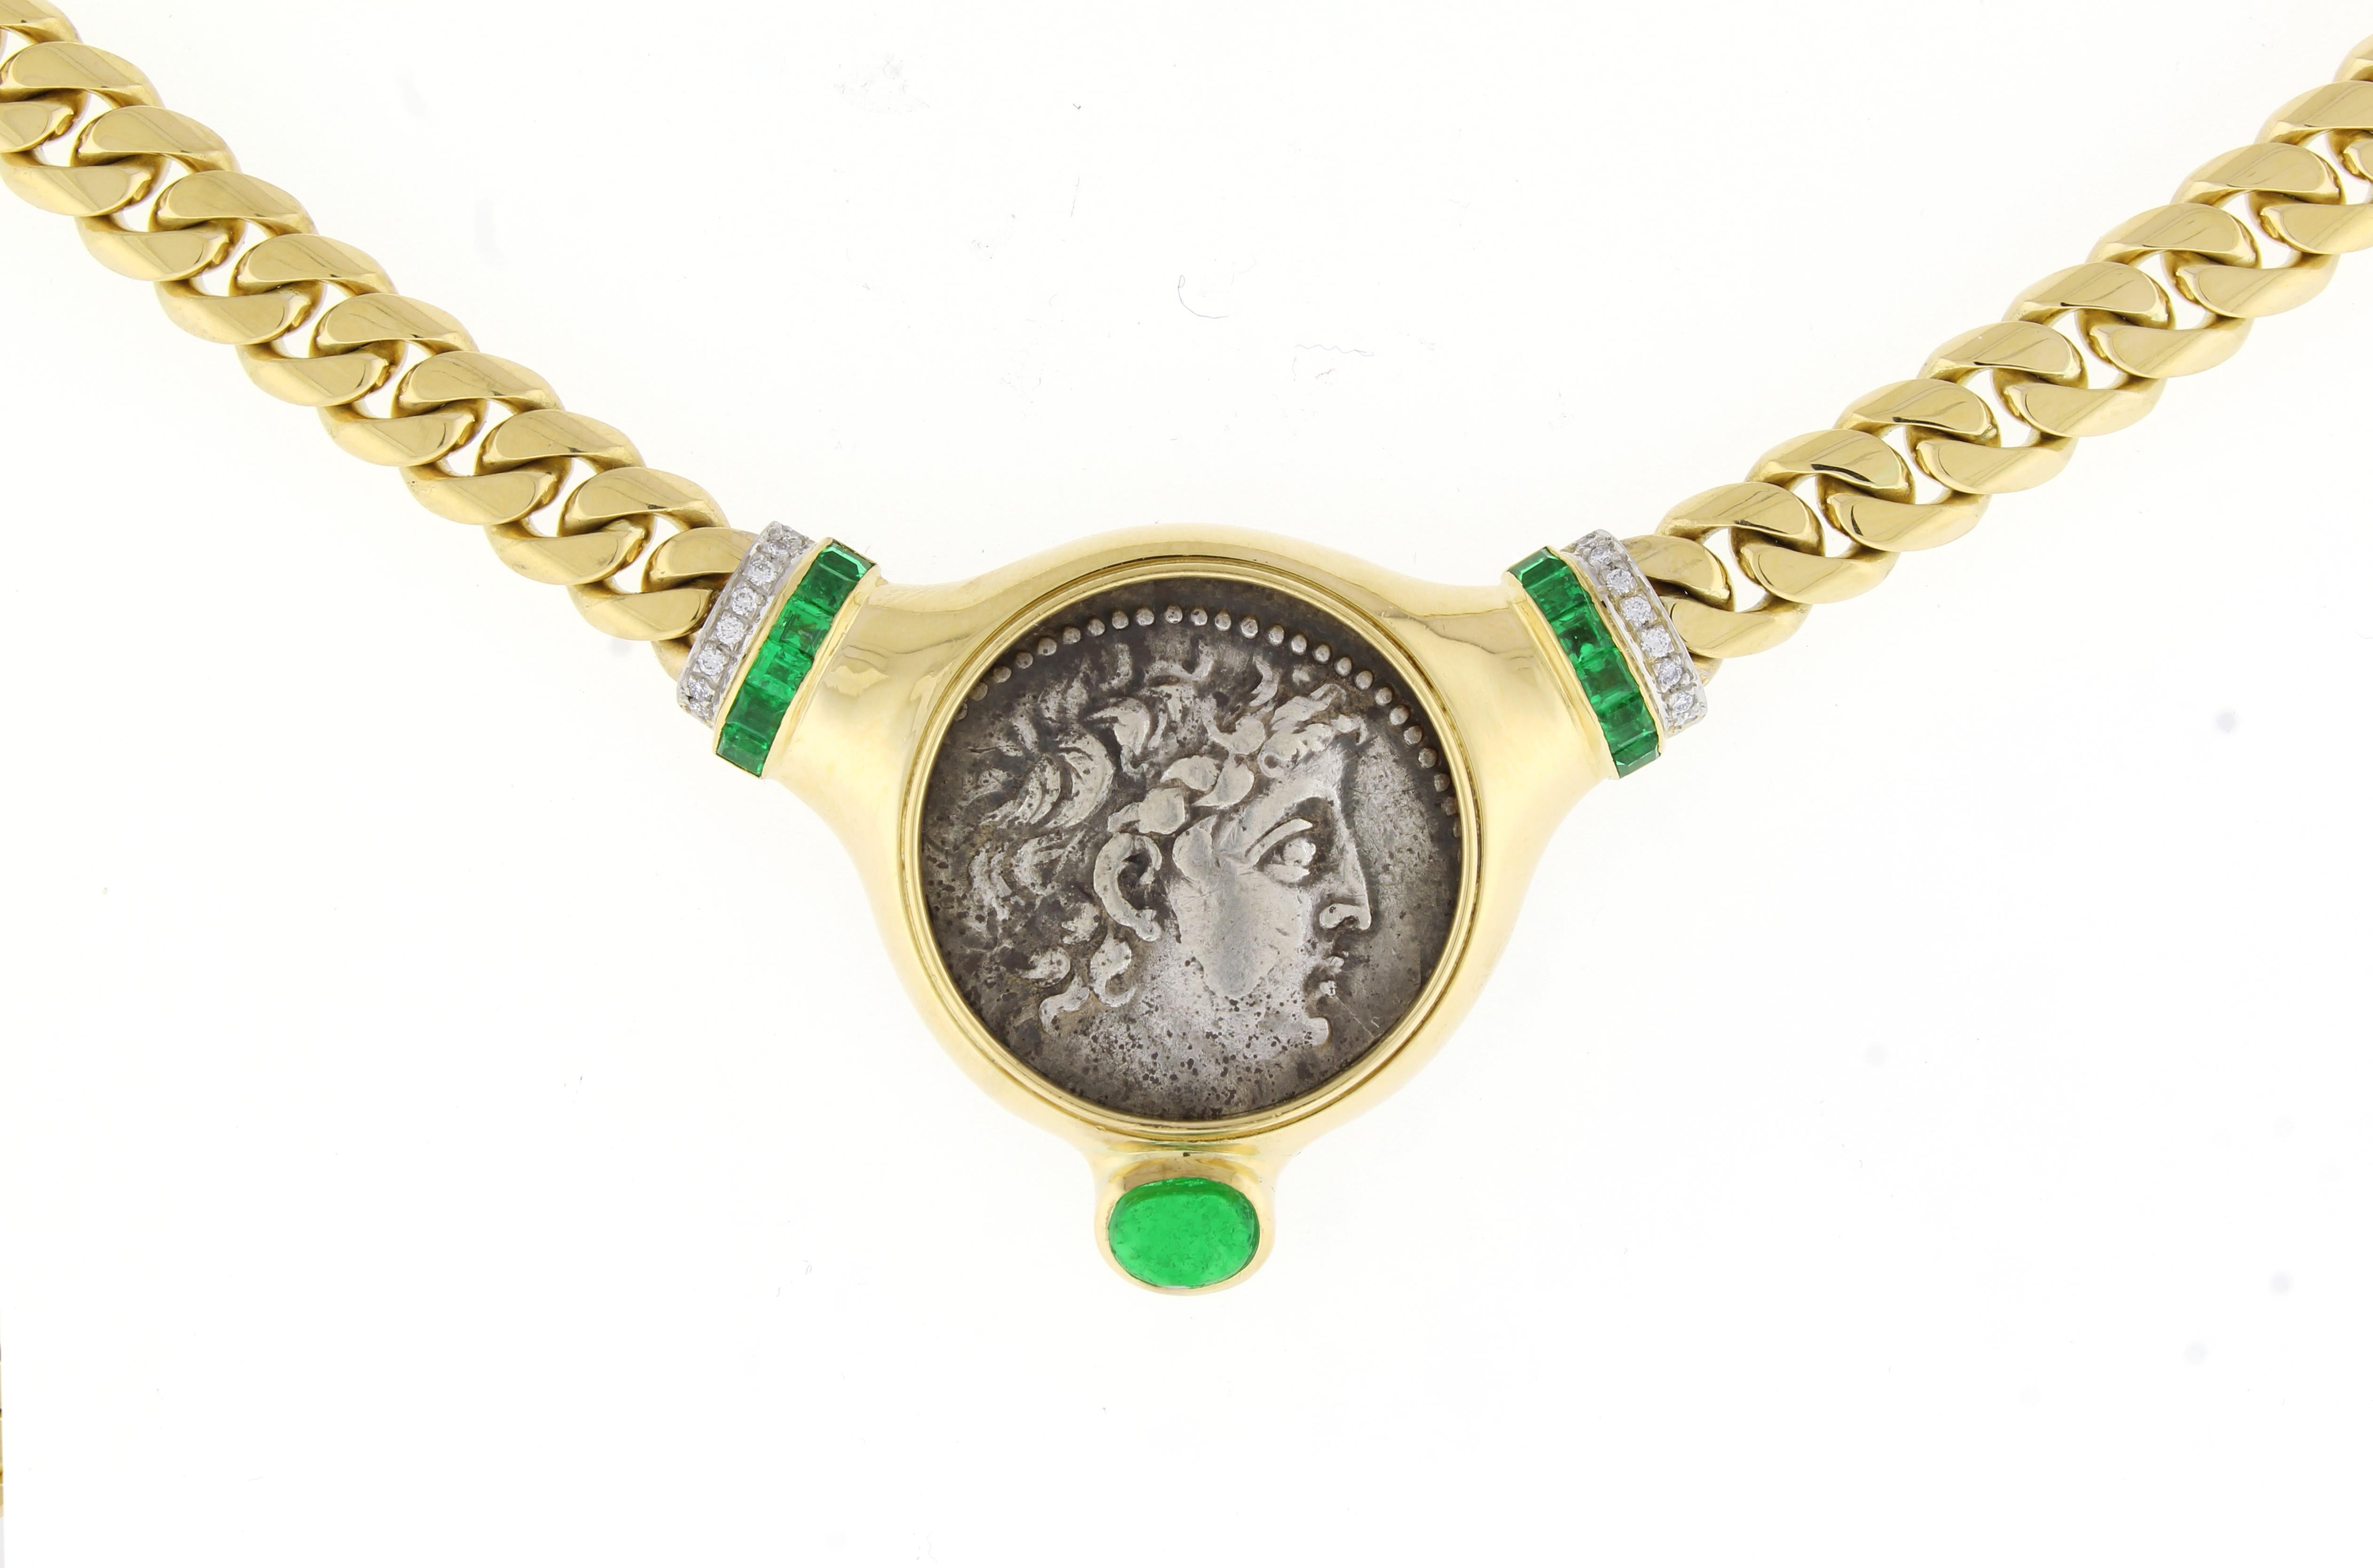 Passionate about incorporating features of Rome’s Imperial glory into its designs, Bvlgari began mounting ancient coins into its jewelry as early as the 1960's. Showing women just how alluring a 2.000-year-old coin can look when combined with a